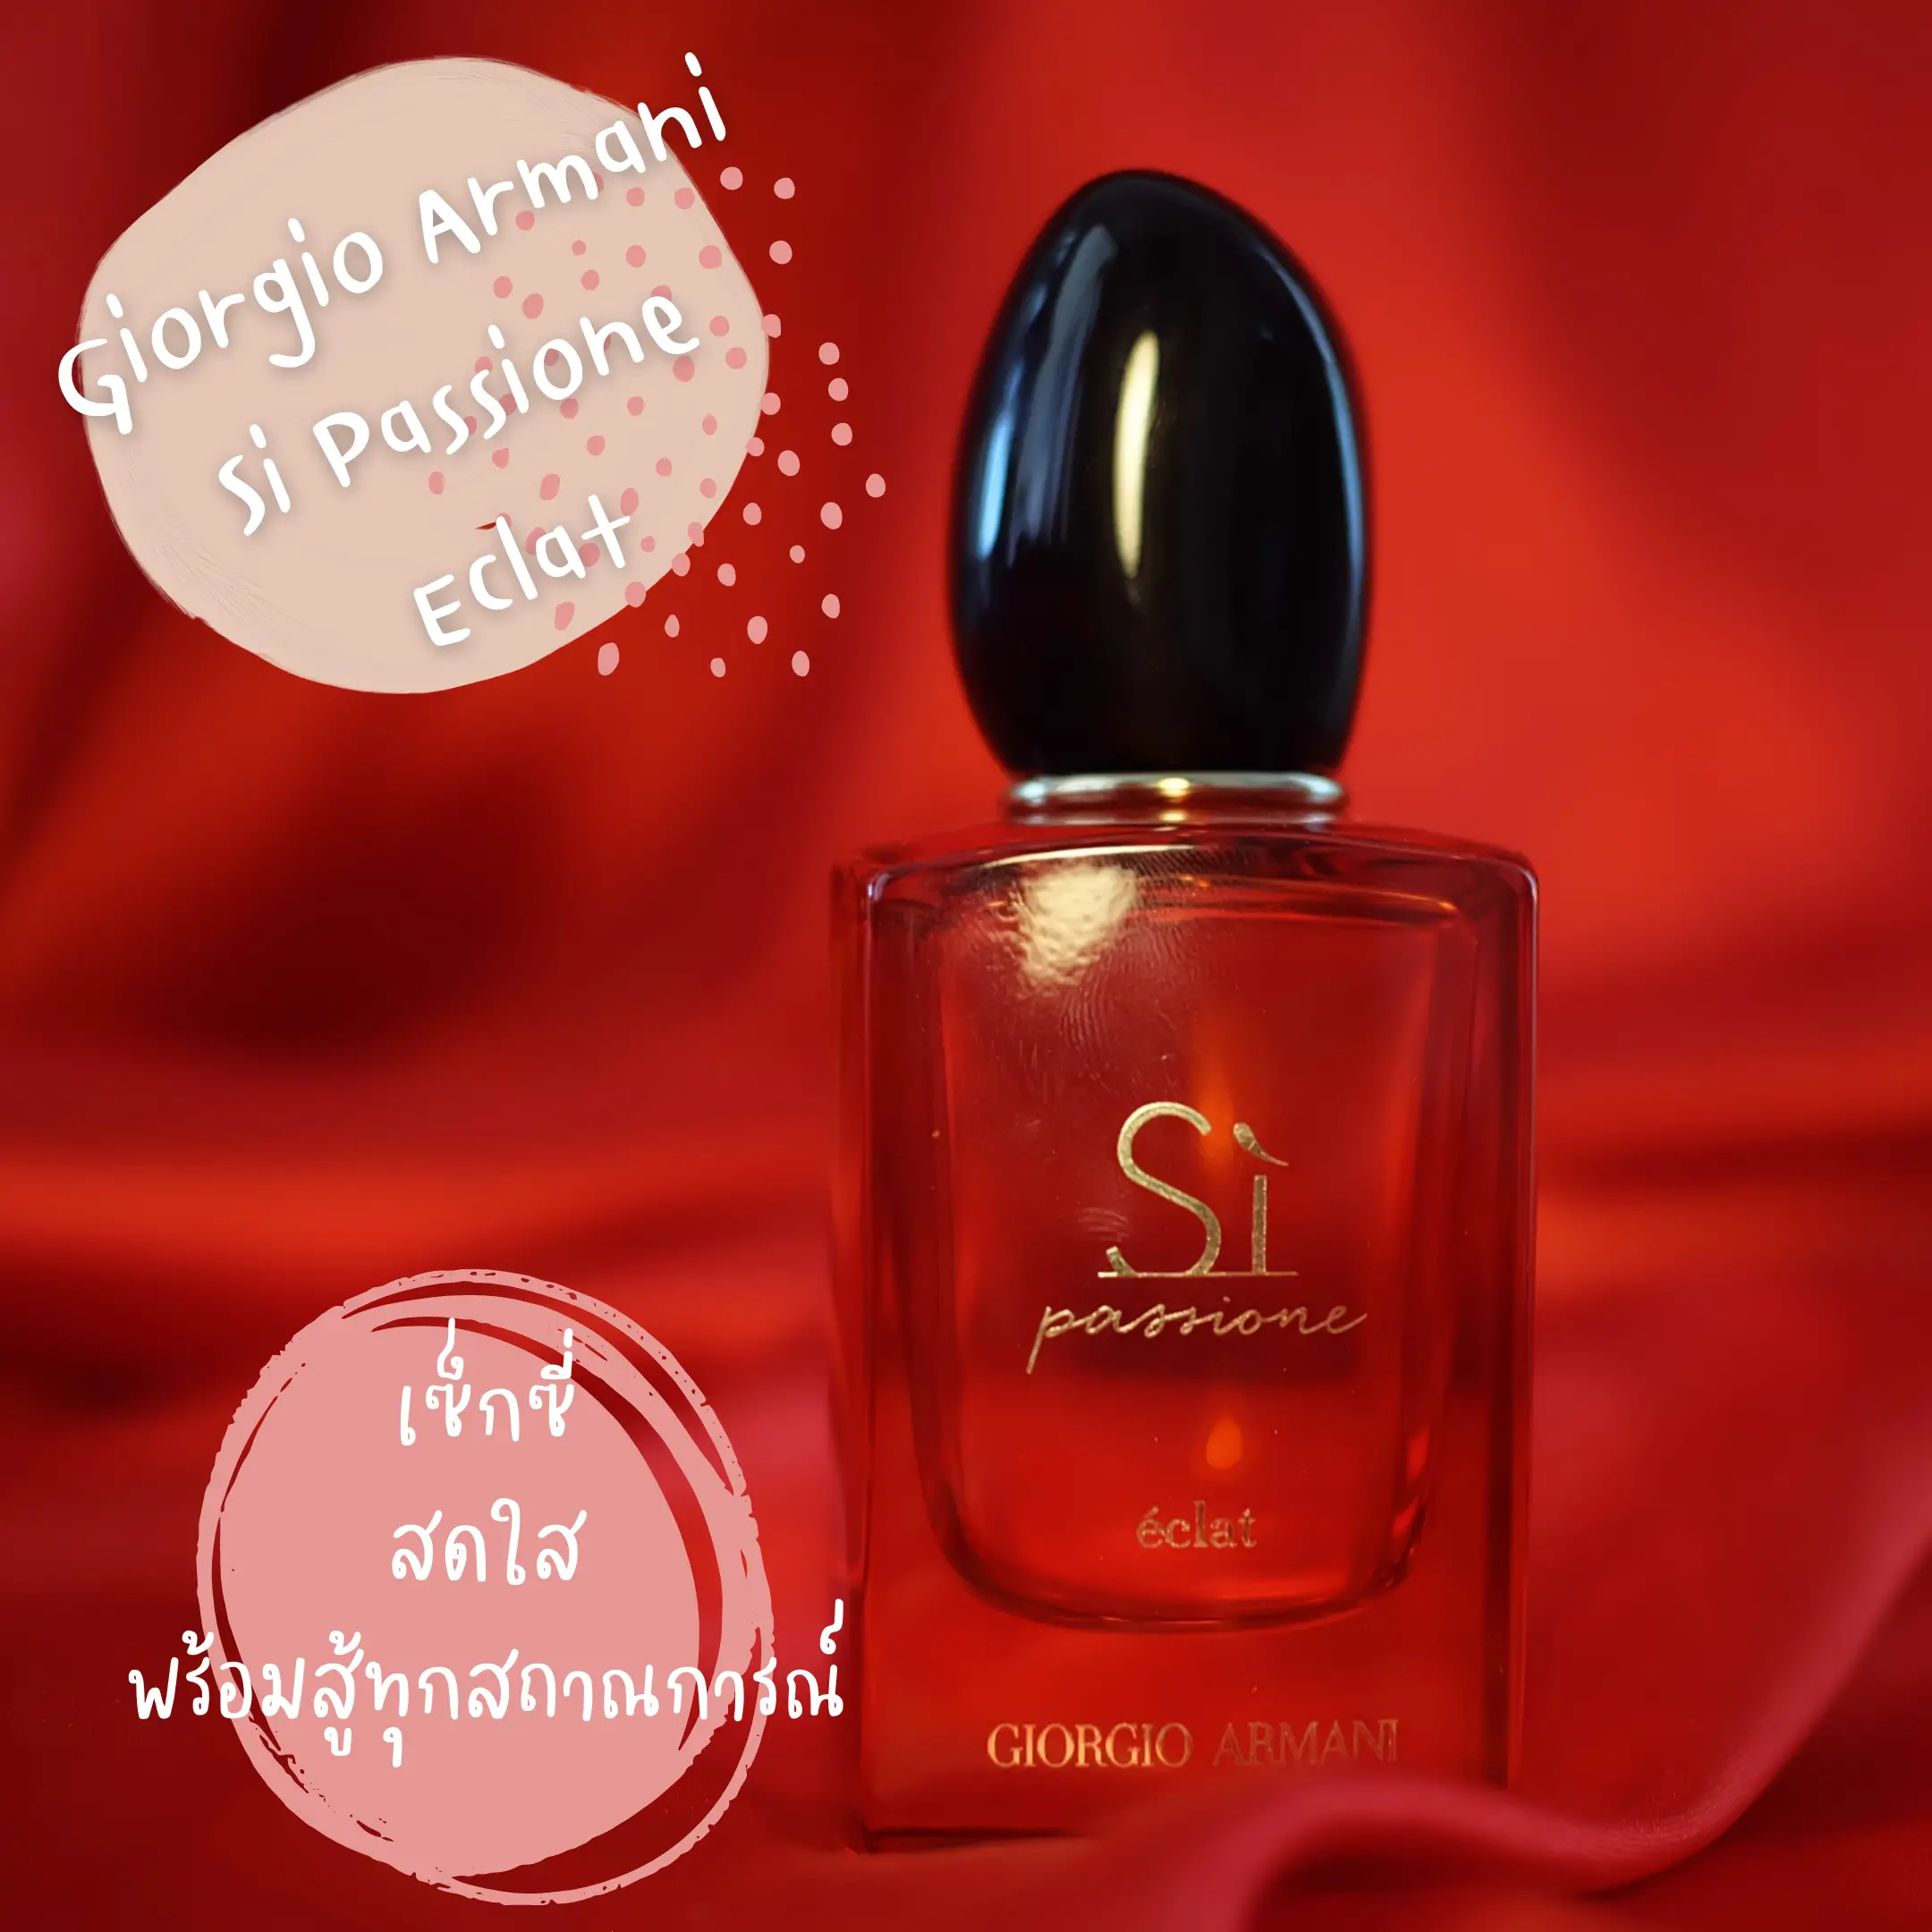 Sexy Bright: Armani Si passione Eclat   Gallery posted by Scented